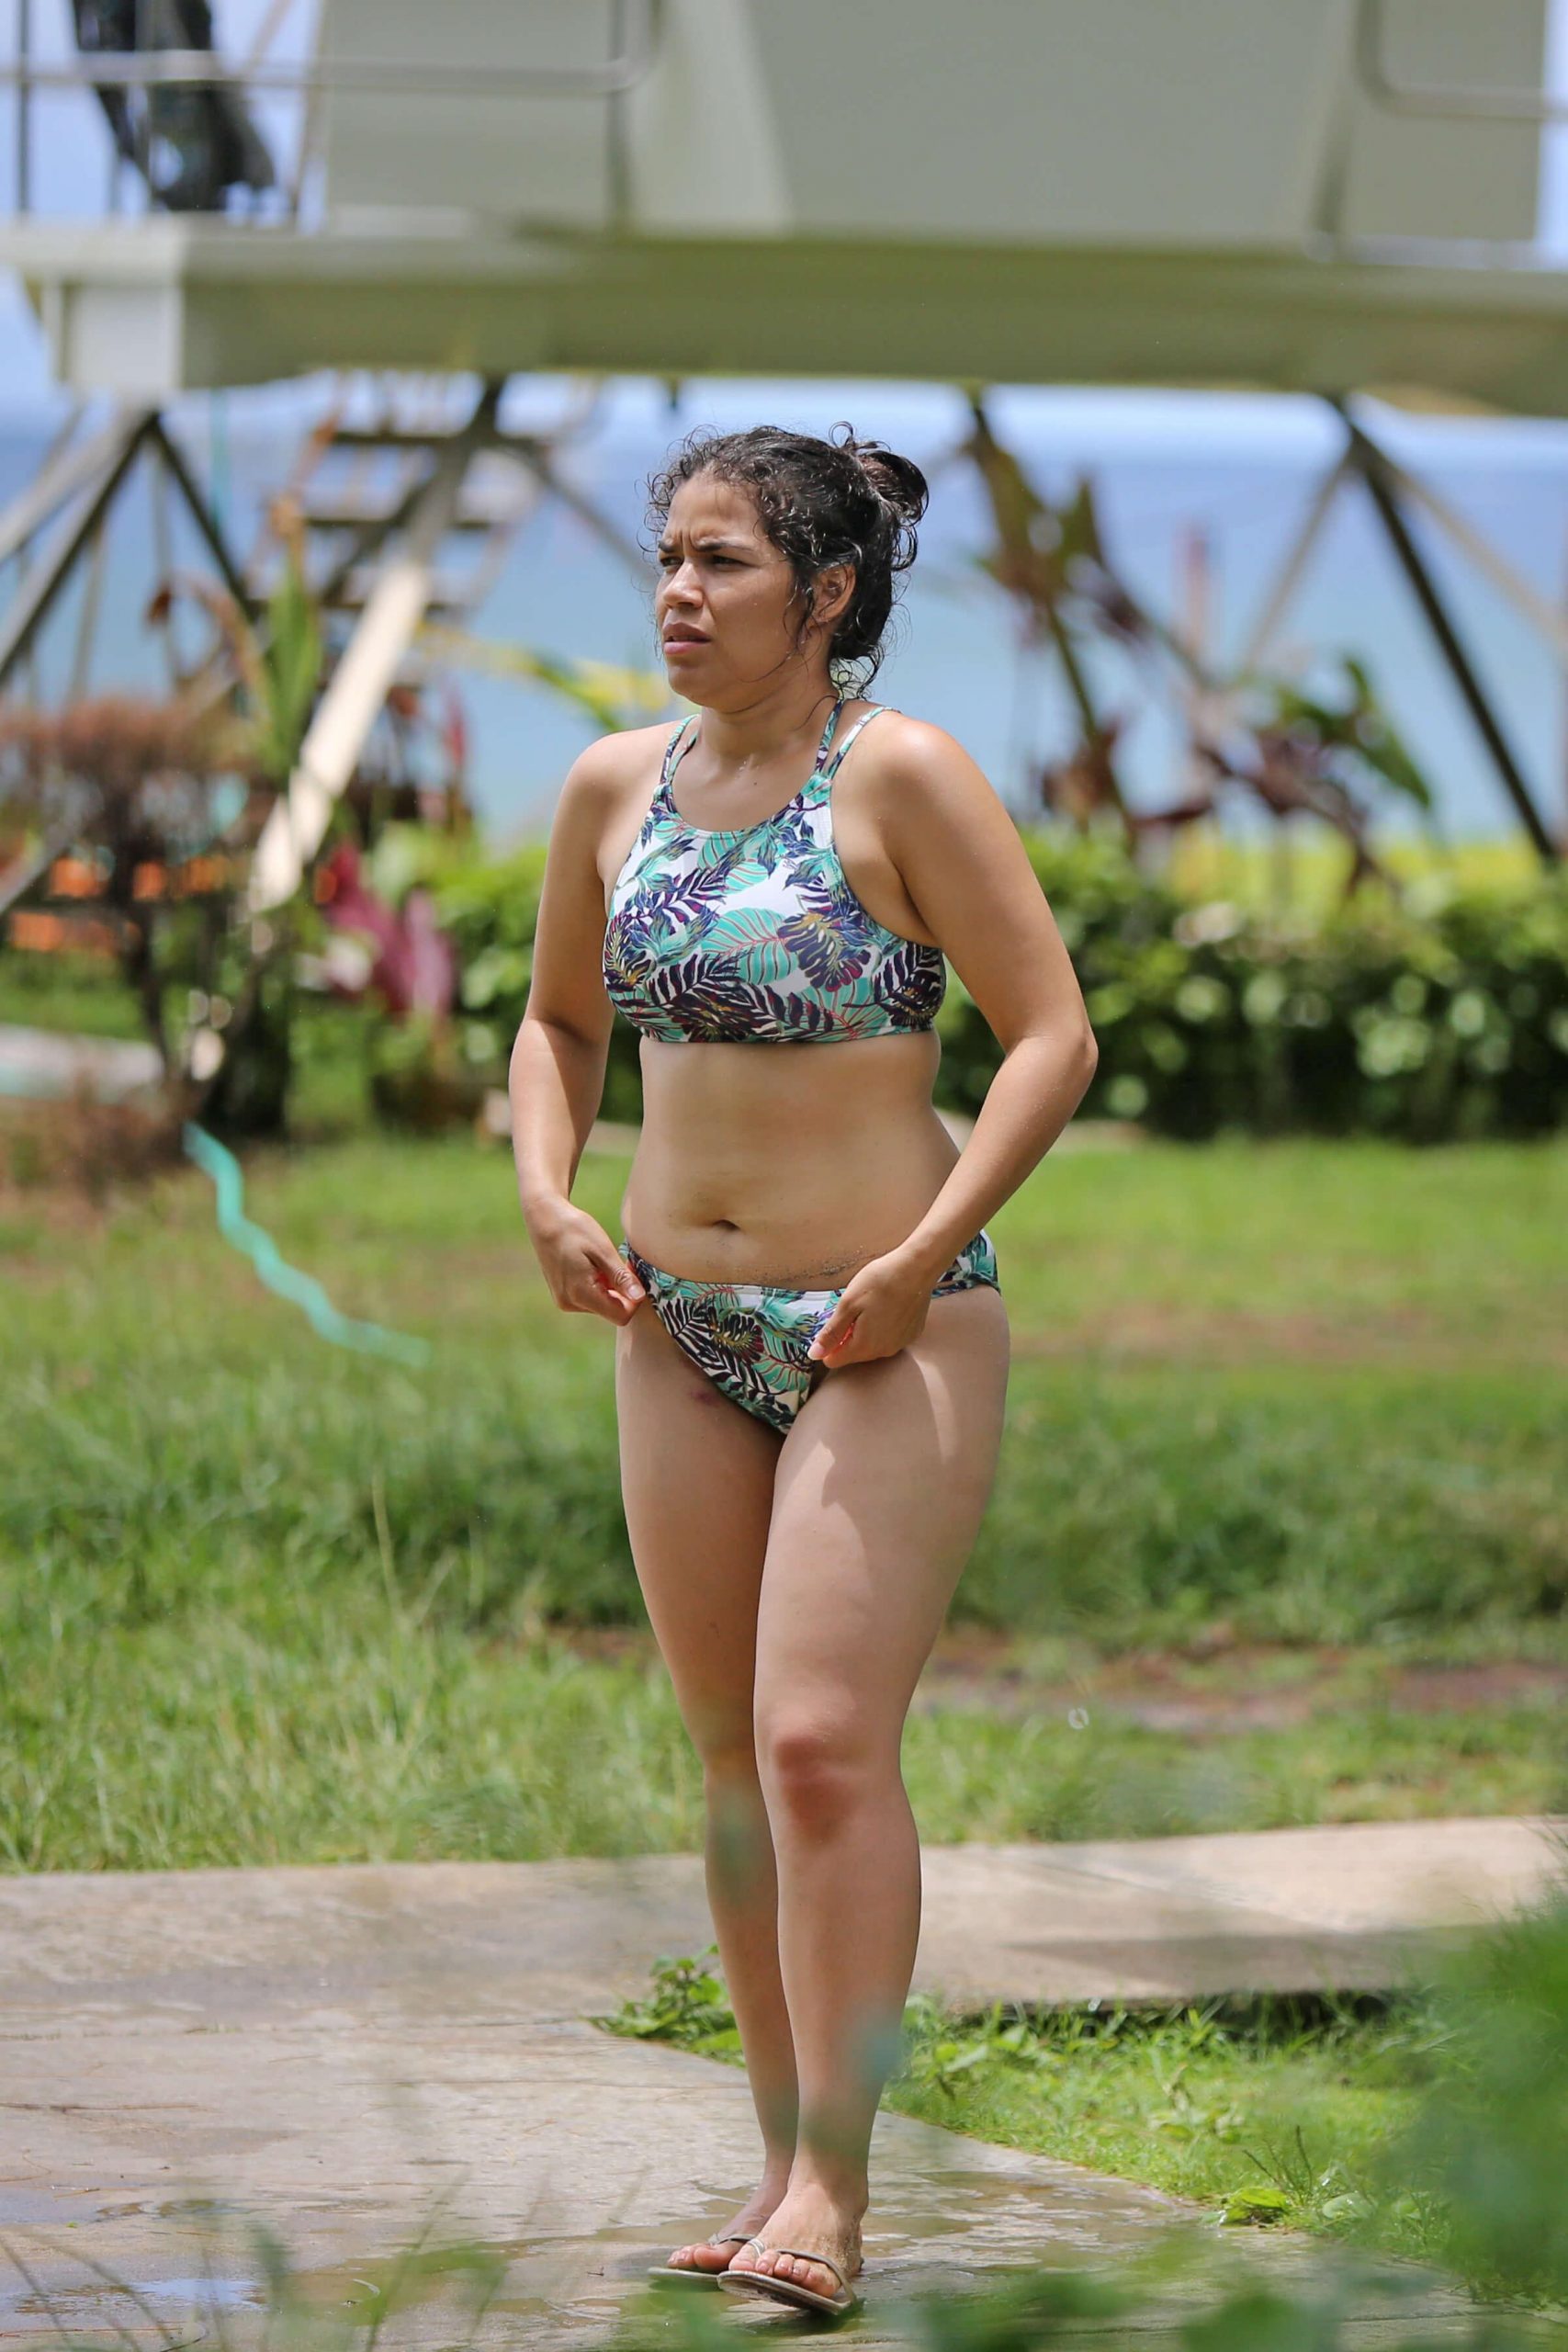 51 Sexy America Ferrera Boobs Pictures Reveal Her Lofty And Attractive Physique 470